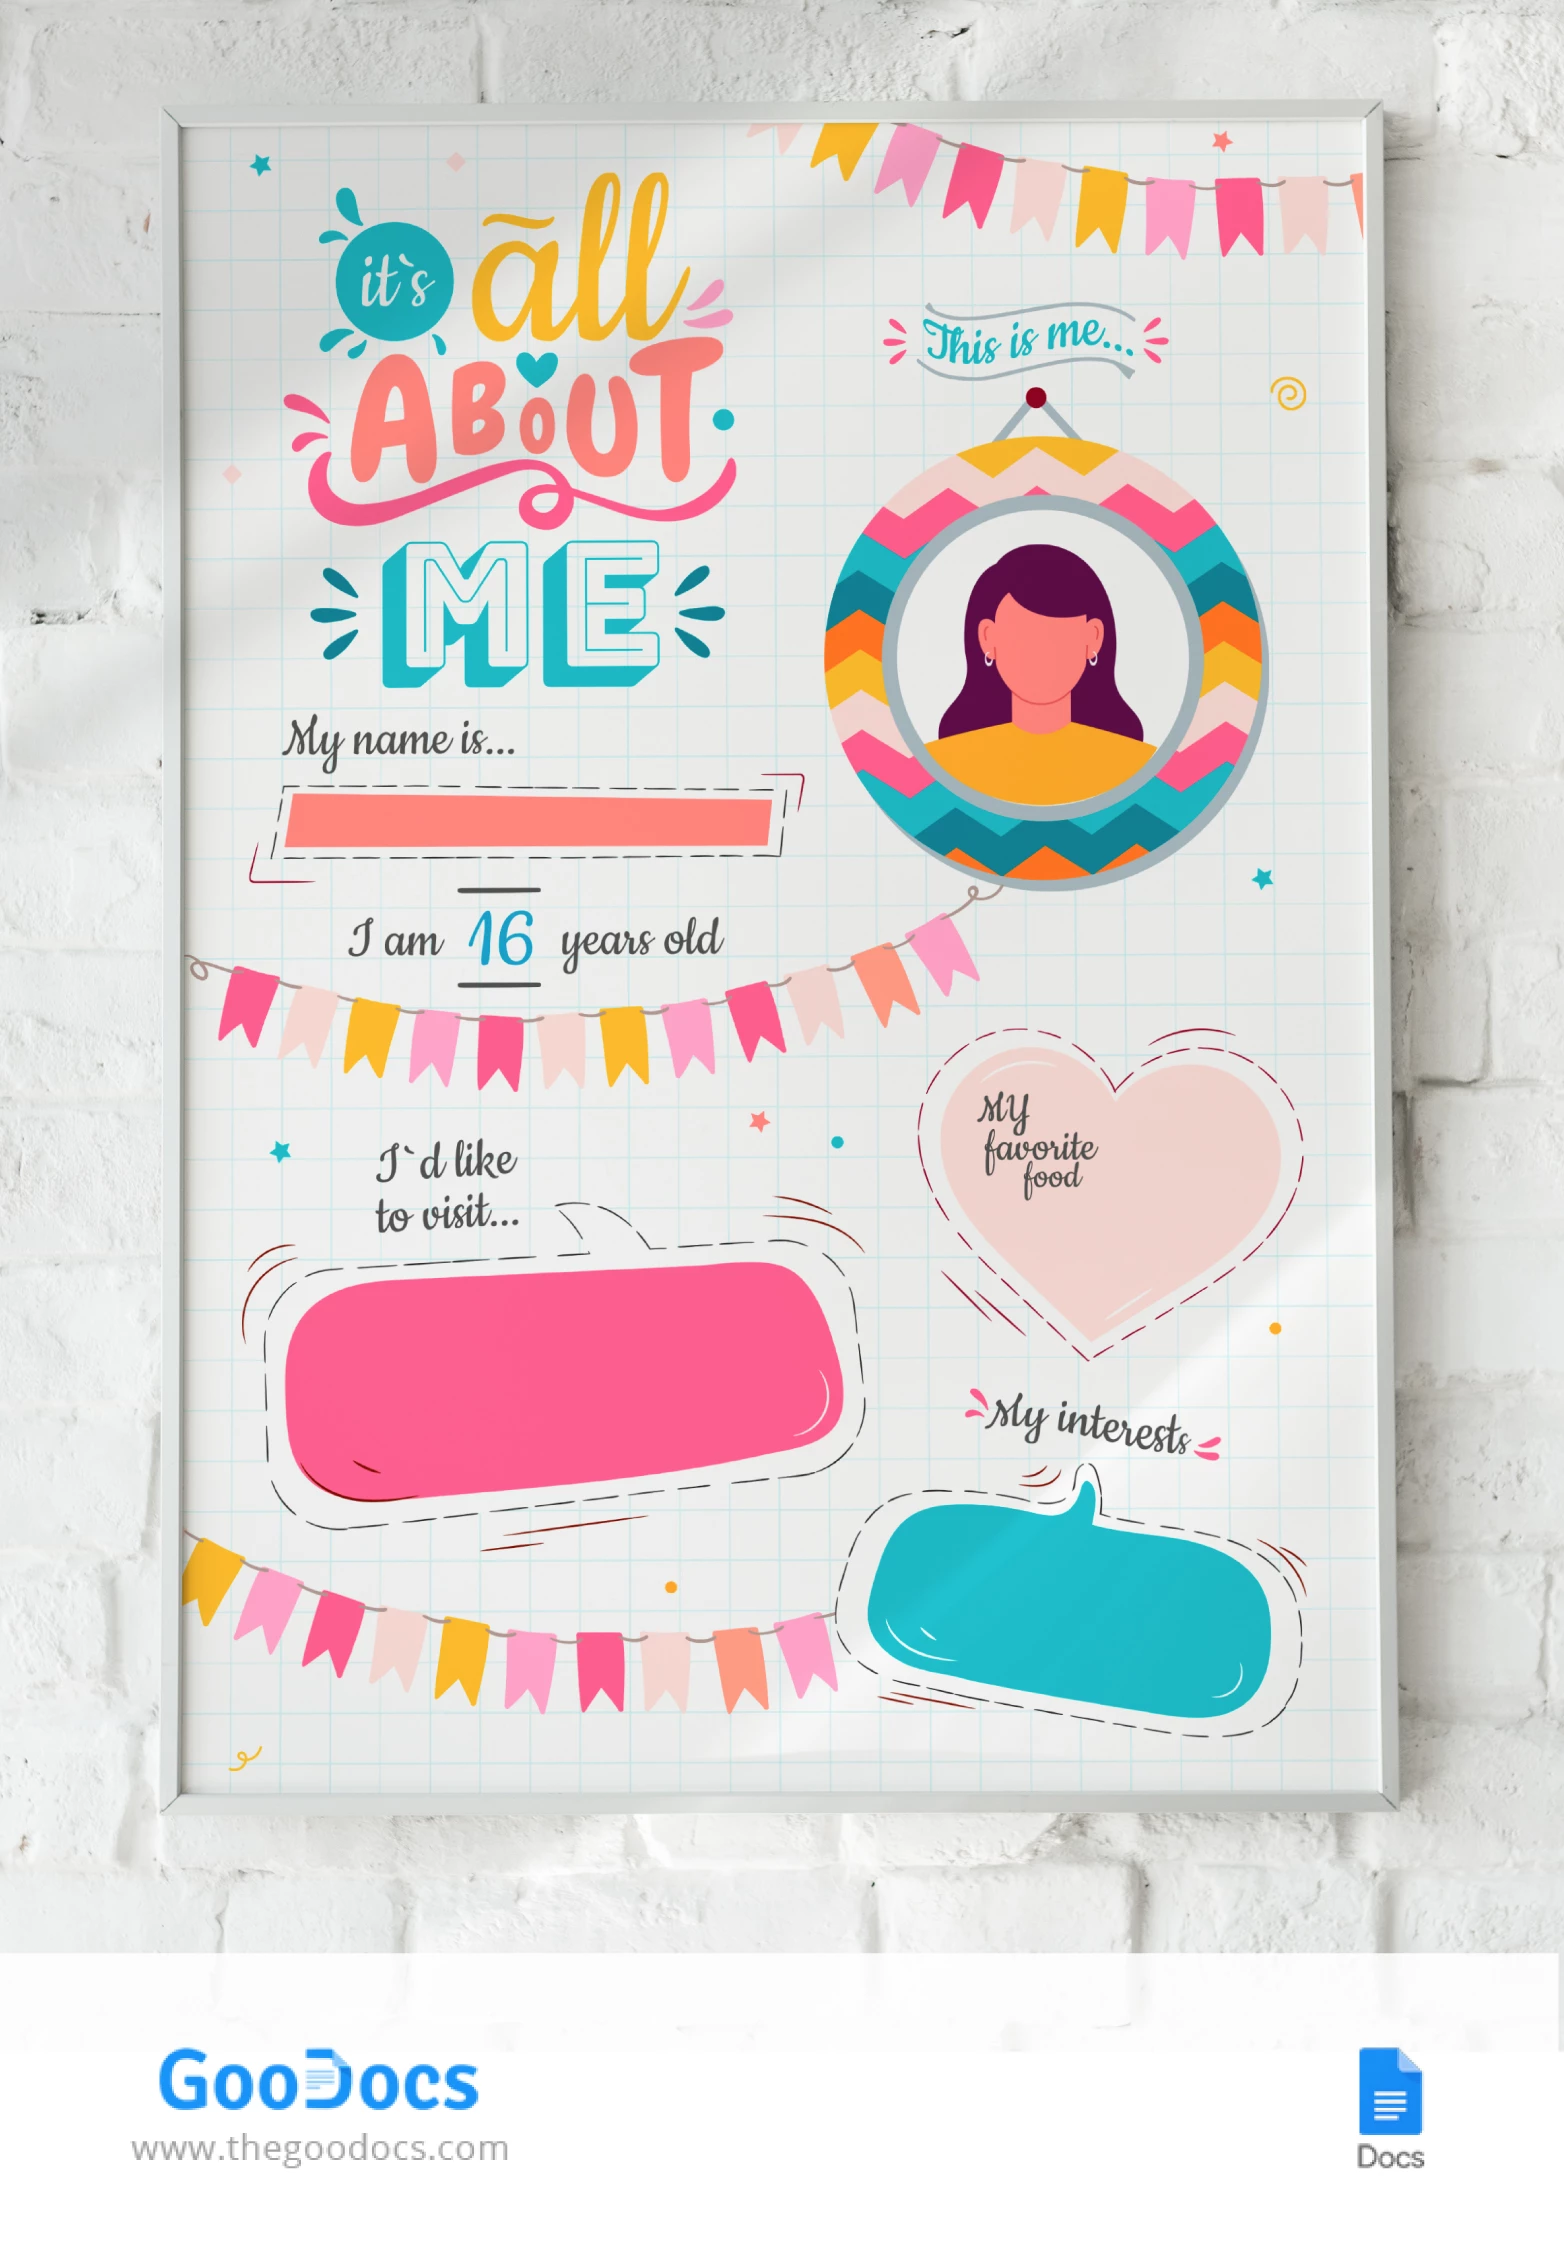 All About Me Poster - free Google Docs Template - 10067803